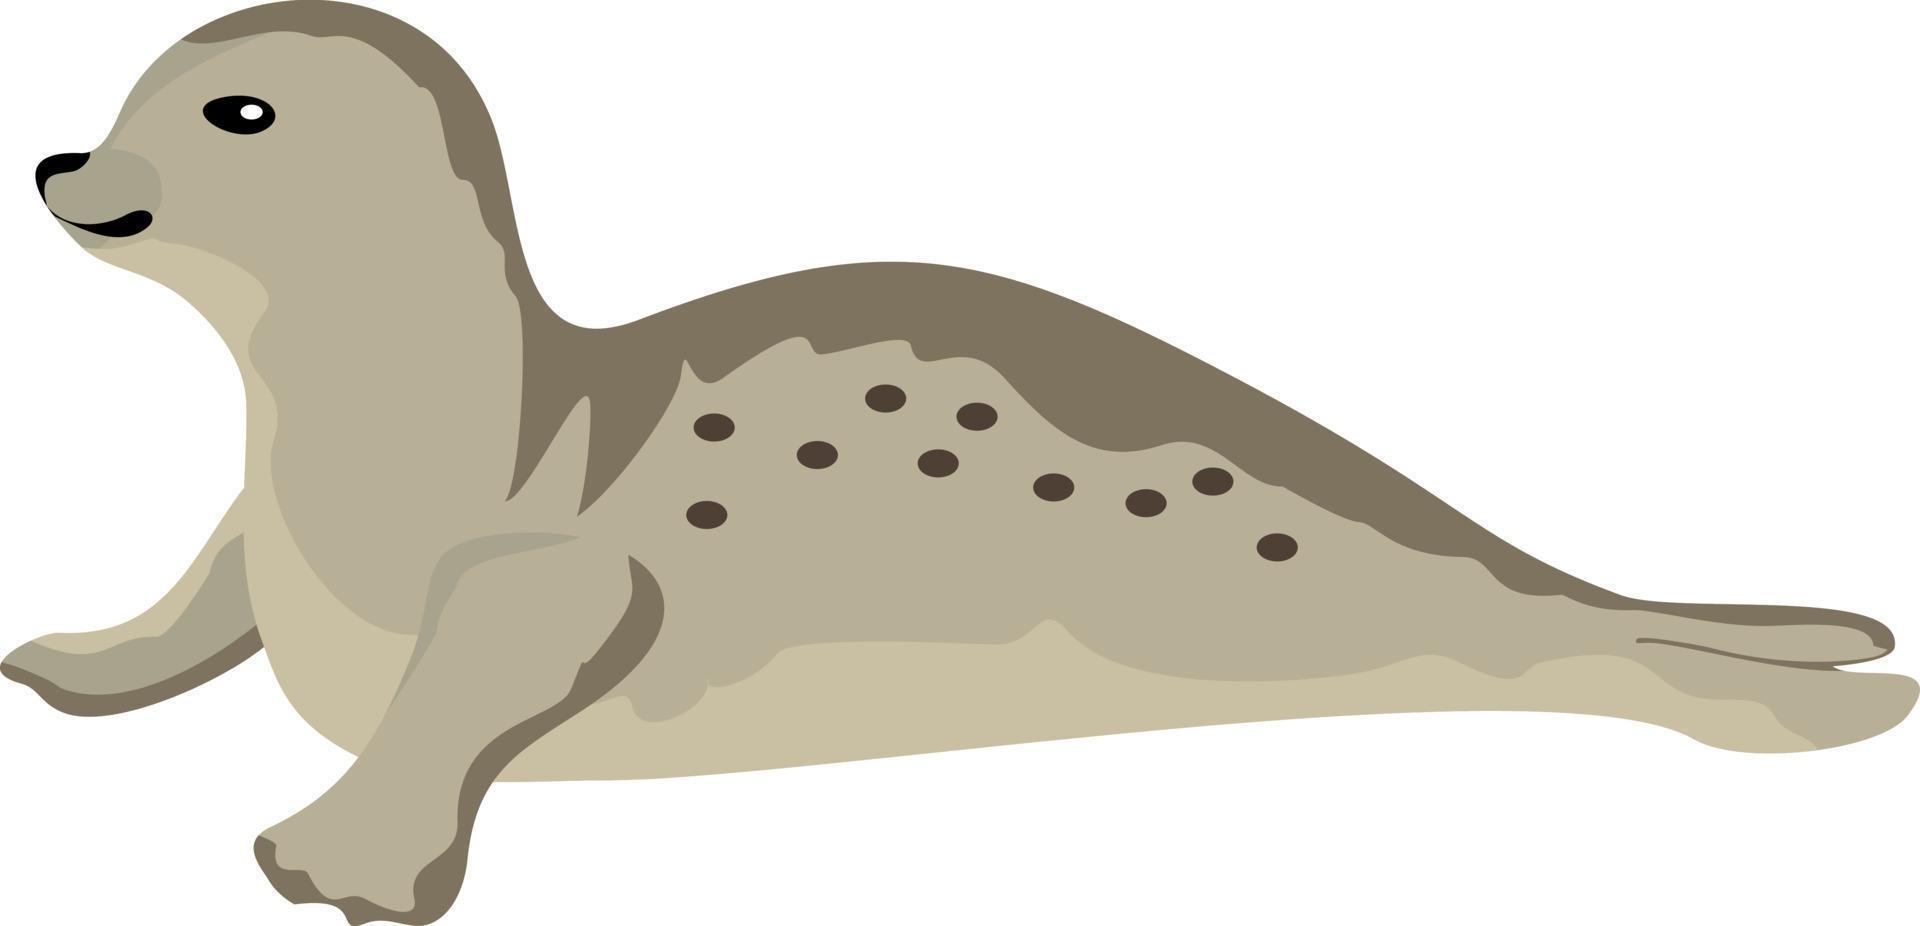 Seal animal. Seal lays. The seal has its head up and is looking sideways vector